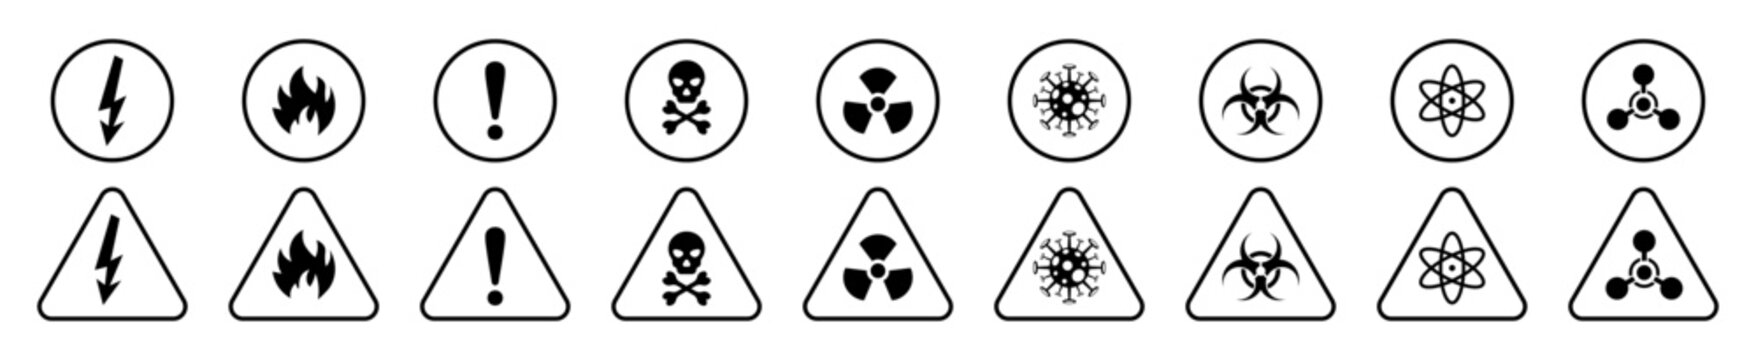  Danger sign collection, Warning Symbol set.,Atomic Danger Icon, Nuclear Radiation Icon, Toxic icons .Vector Illustration